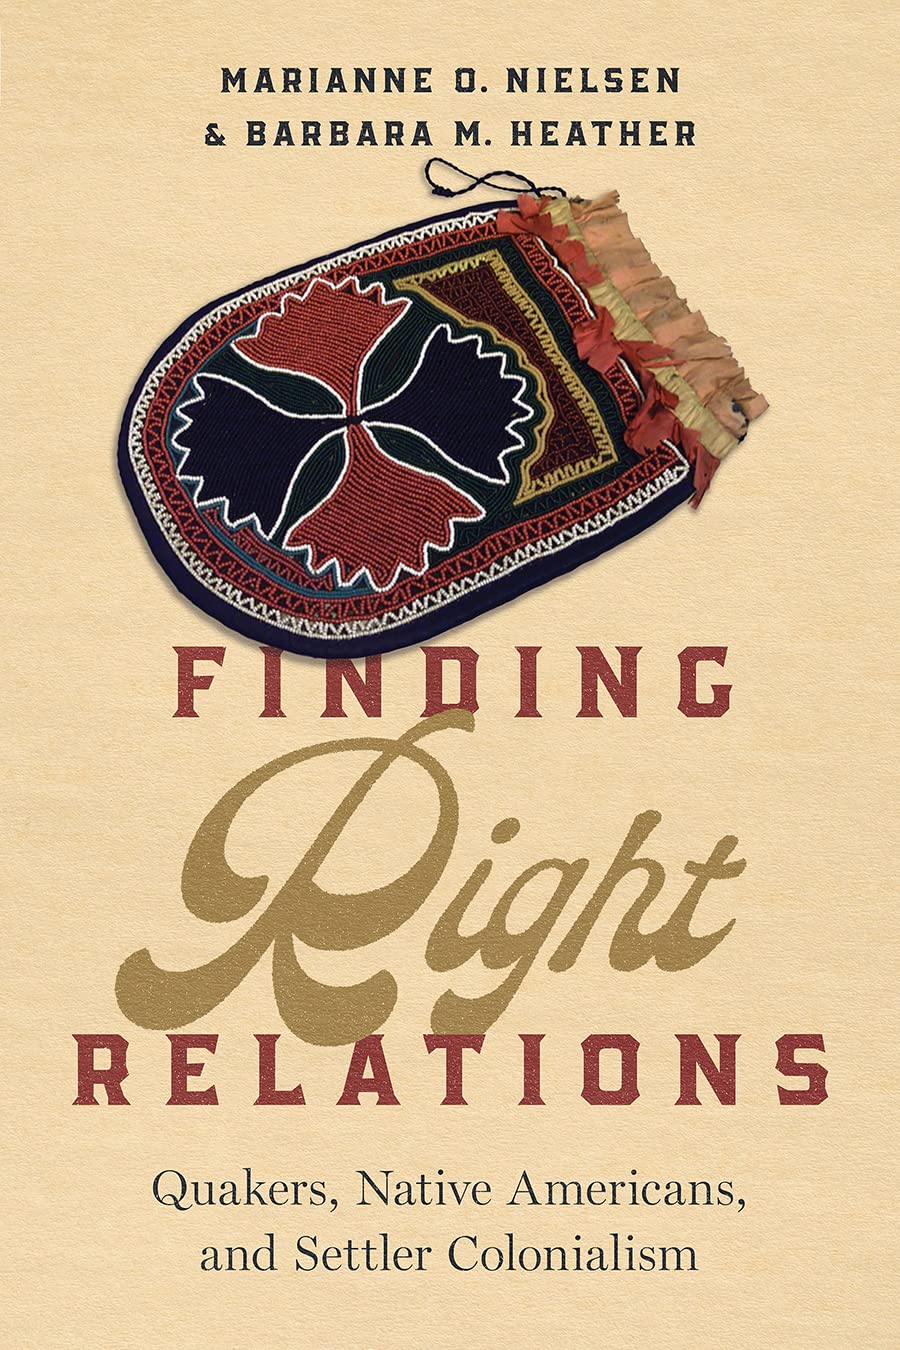 Finding Right Relations: Quakers, Native Americans, and Settler Colonialism by Marianne O. Nielsen & Barbara M. Heather